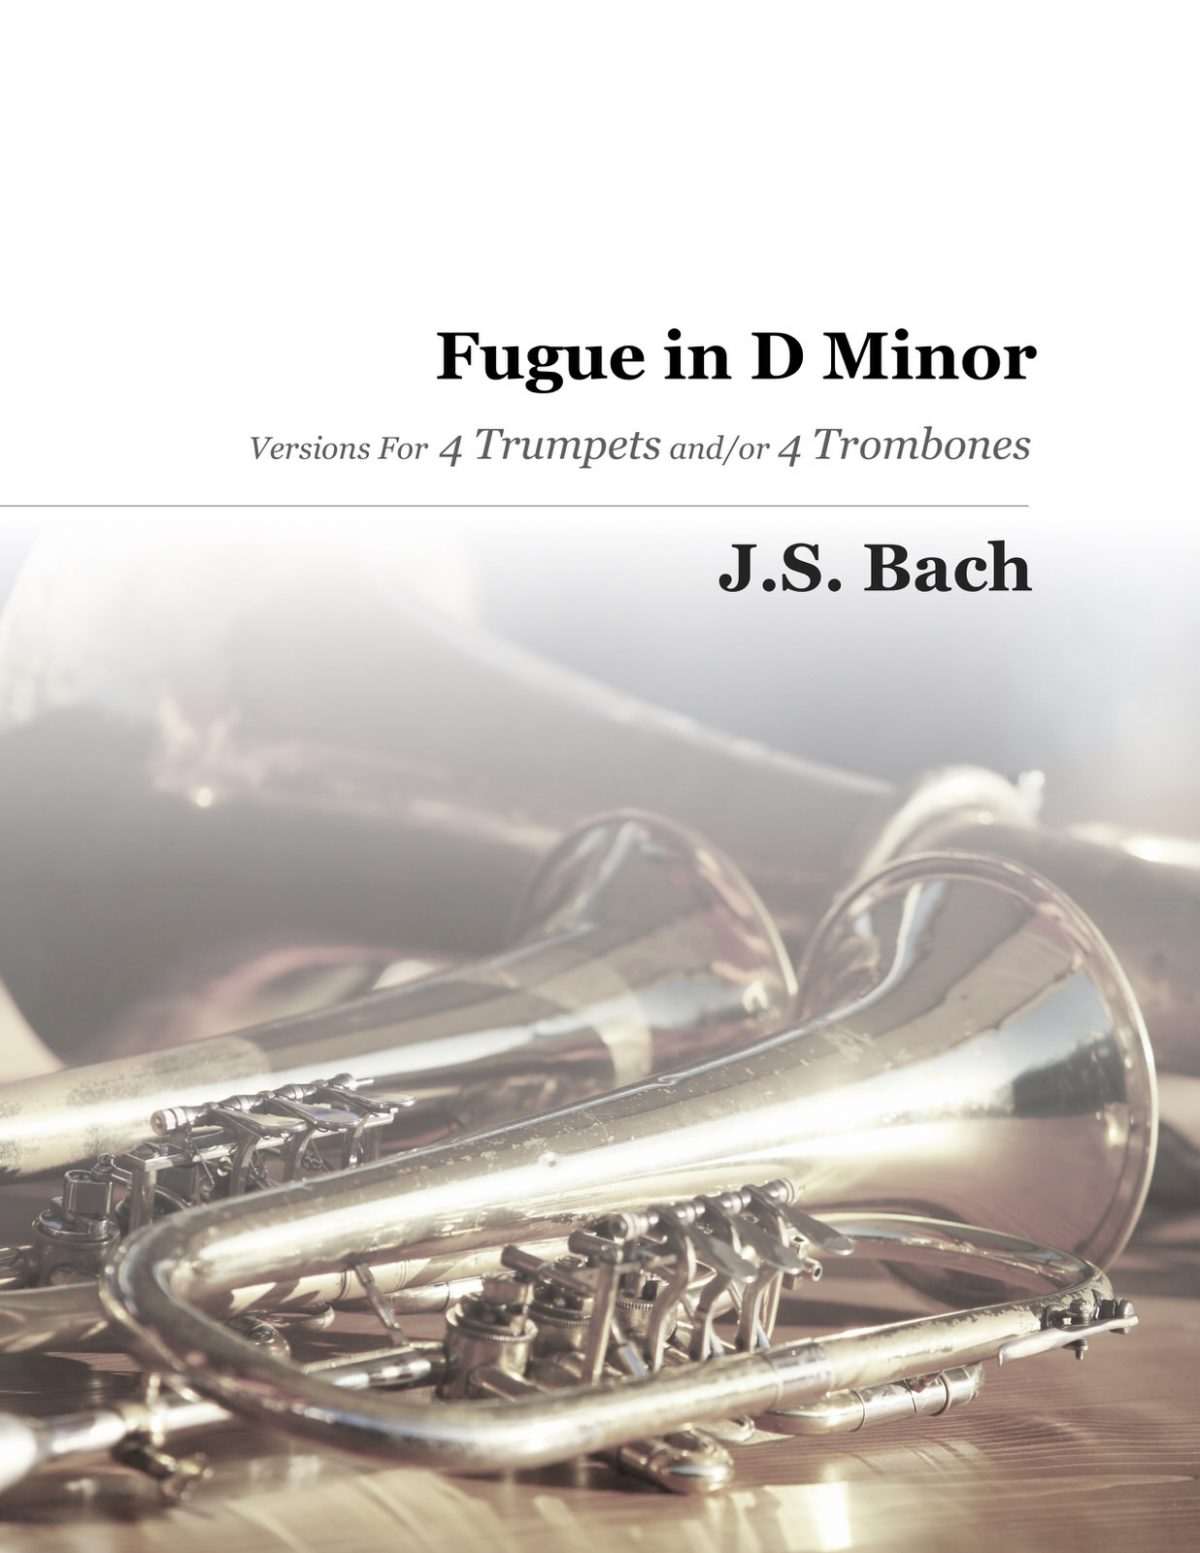 Fugue in D Minor for 4 Trumpets or 4 Trombones